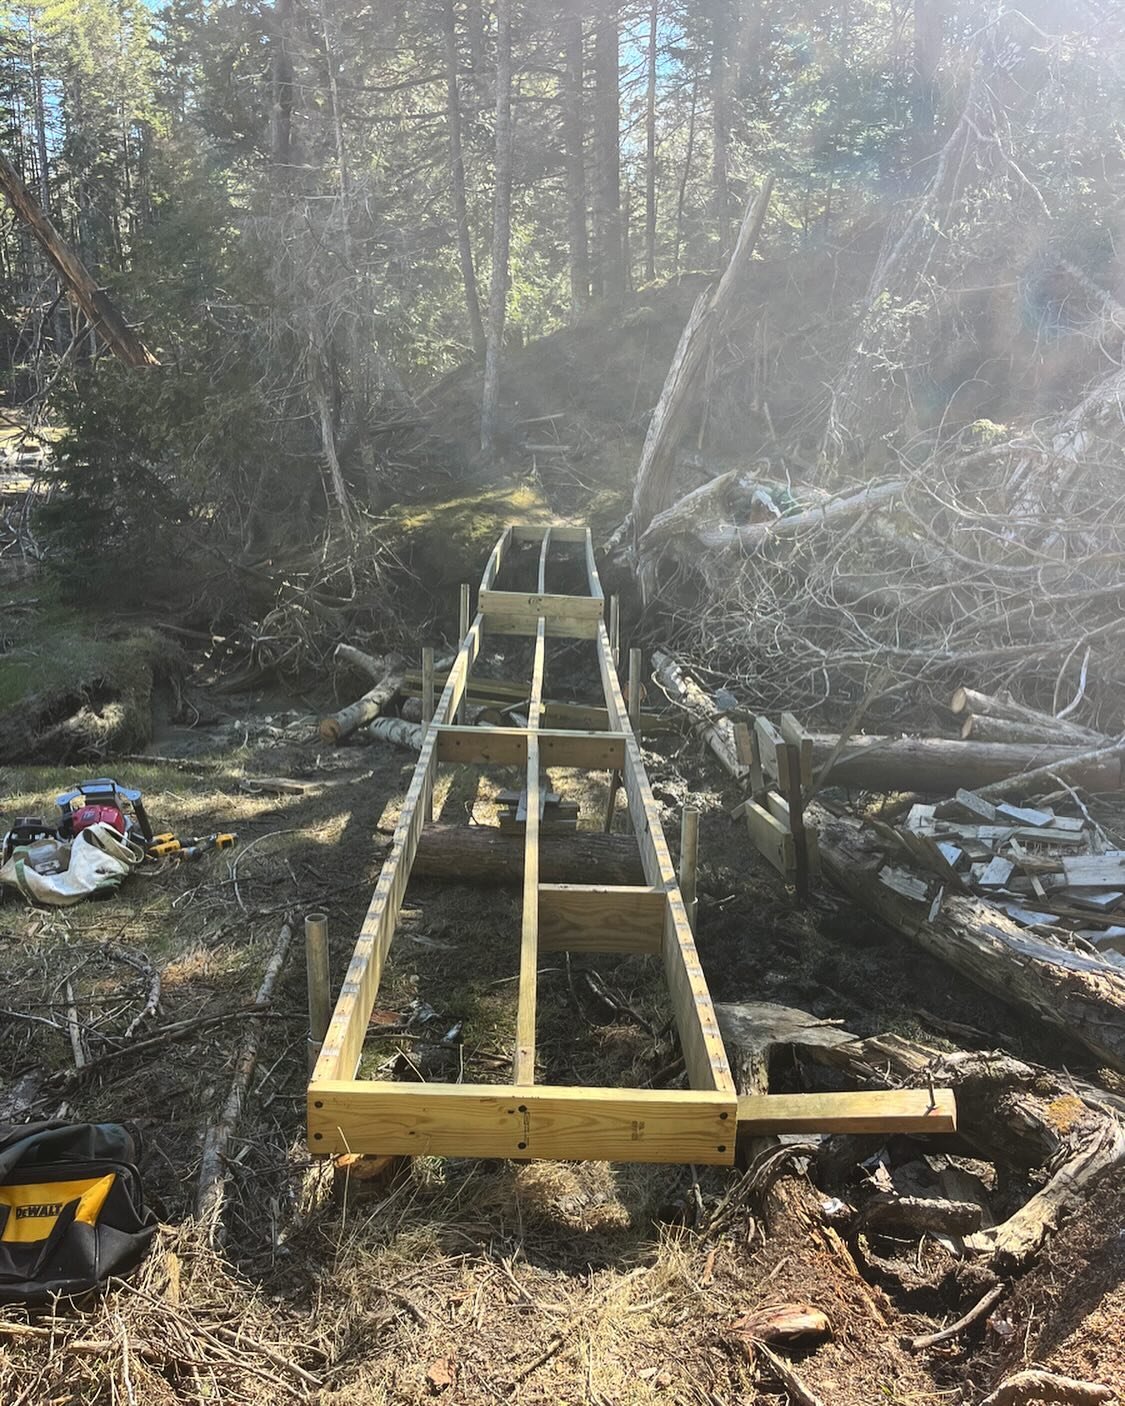 Making progress on bridge replacements at the Herbert Preserve, thank goodness for the beautiful weather! 

#landtrust #conservation #hiking #trails #landstewardship #ryderscove #maine #trailstewardship